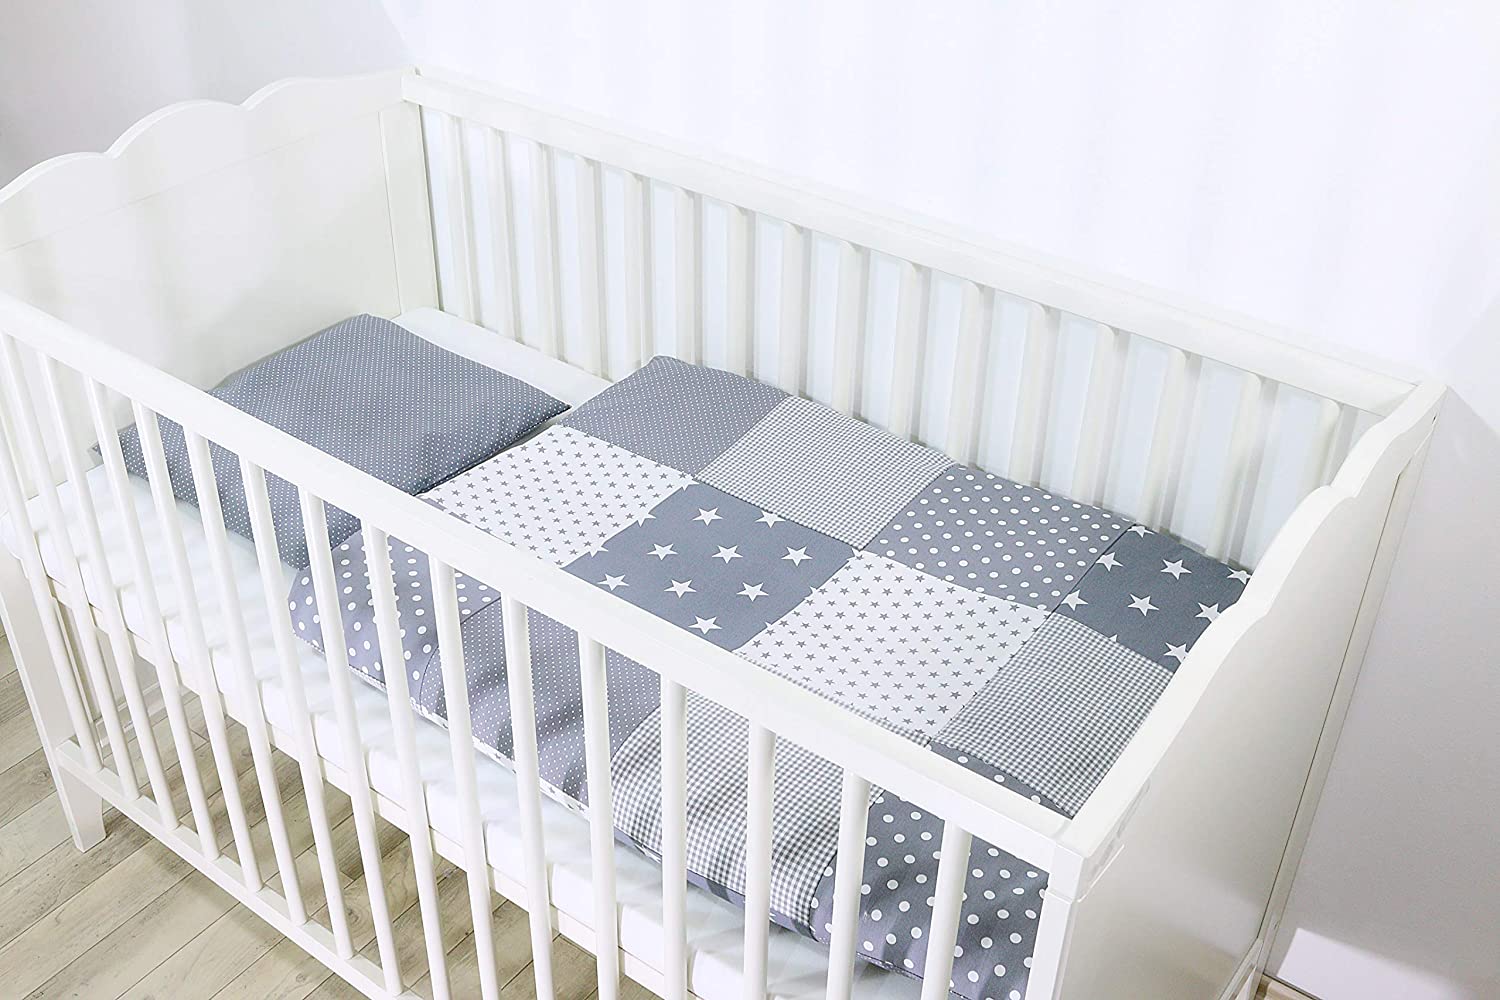 Ullenboom ® Baby Bedding Set - 2 Pieces (Complete): Baby bed linen 80 x 80 cm and pillowcase 35 x 40 cm, baby bed set for the baby bed made from 100% cotton. grey stars